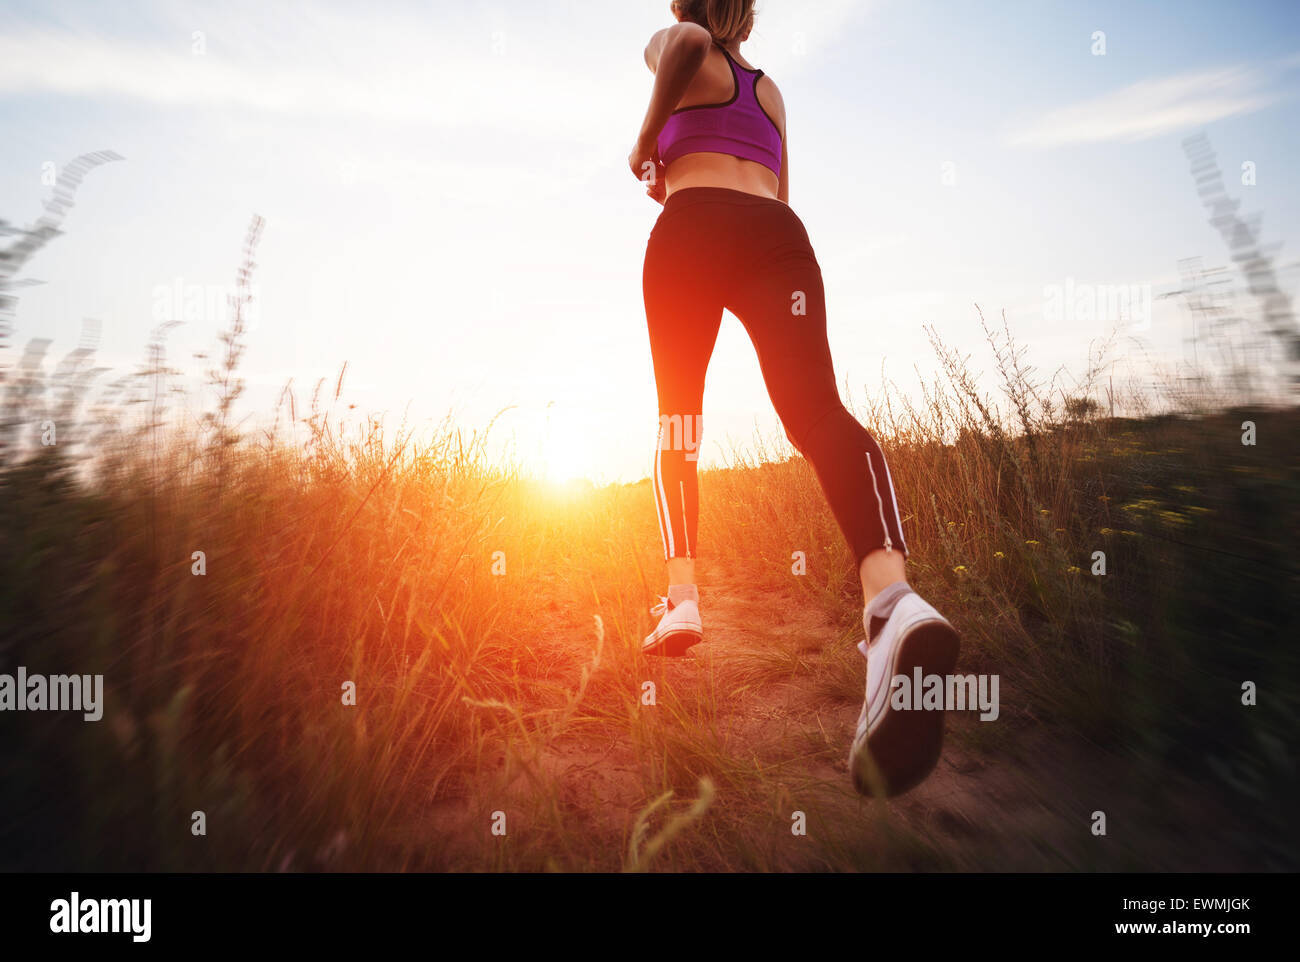 Young woman running on a rural road at sunset in summer field. Lifestyle sports background Stock Photo